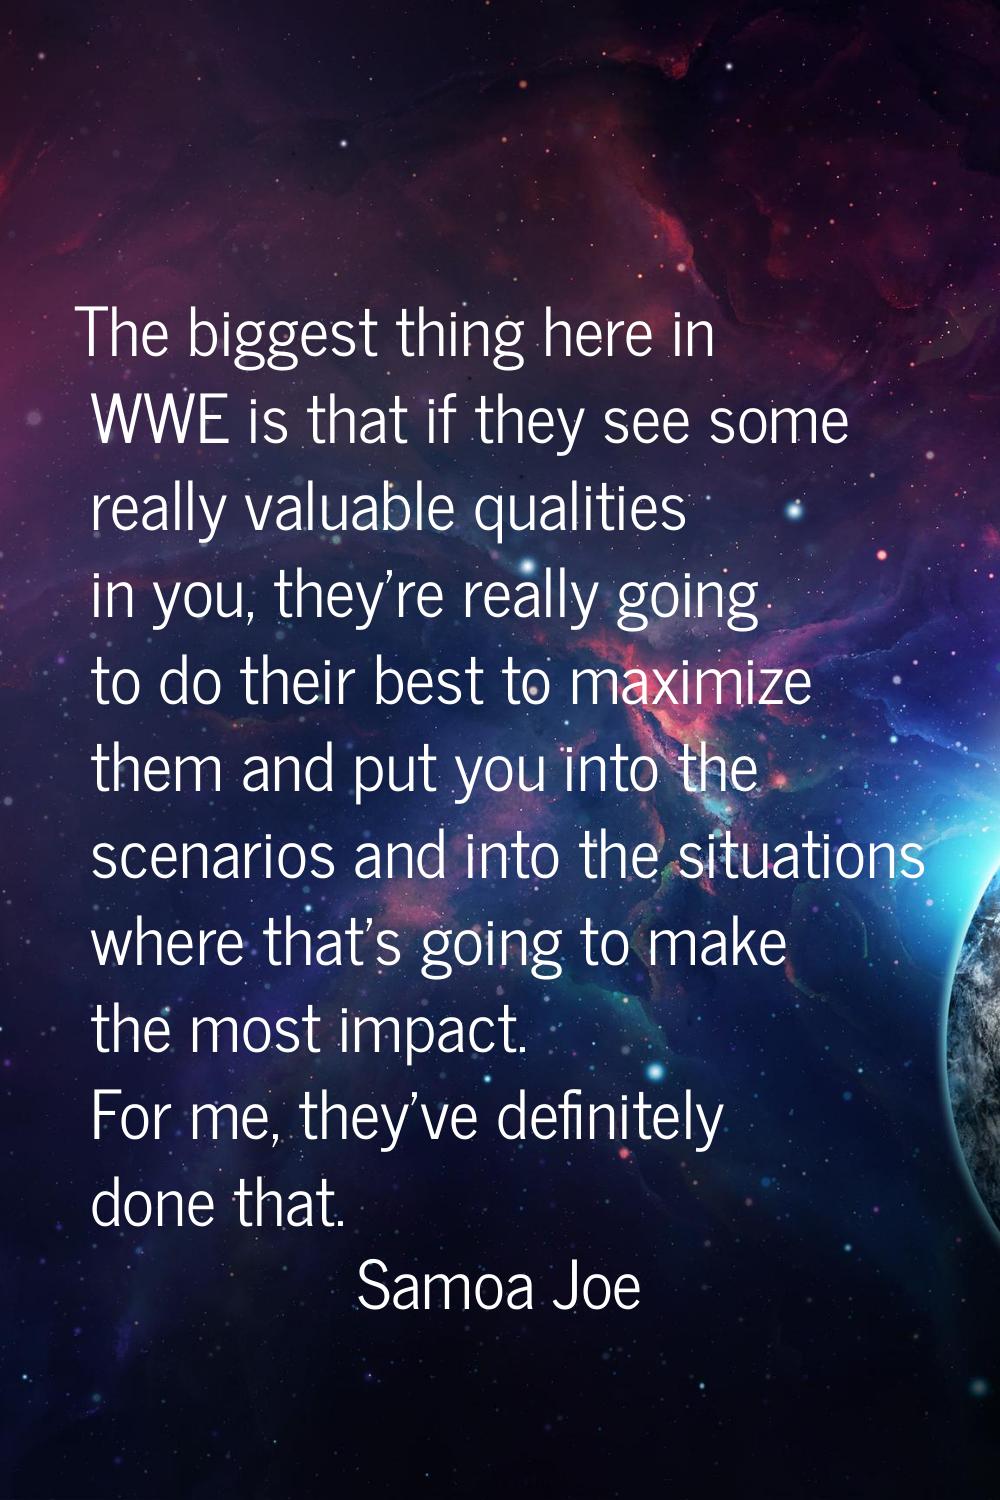 The biggest thing here in WWE is that if they see some really valuable qualities in you, they're re